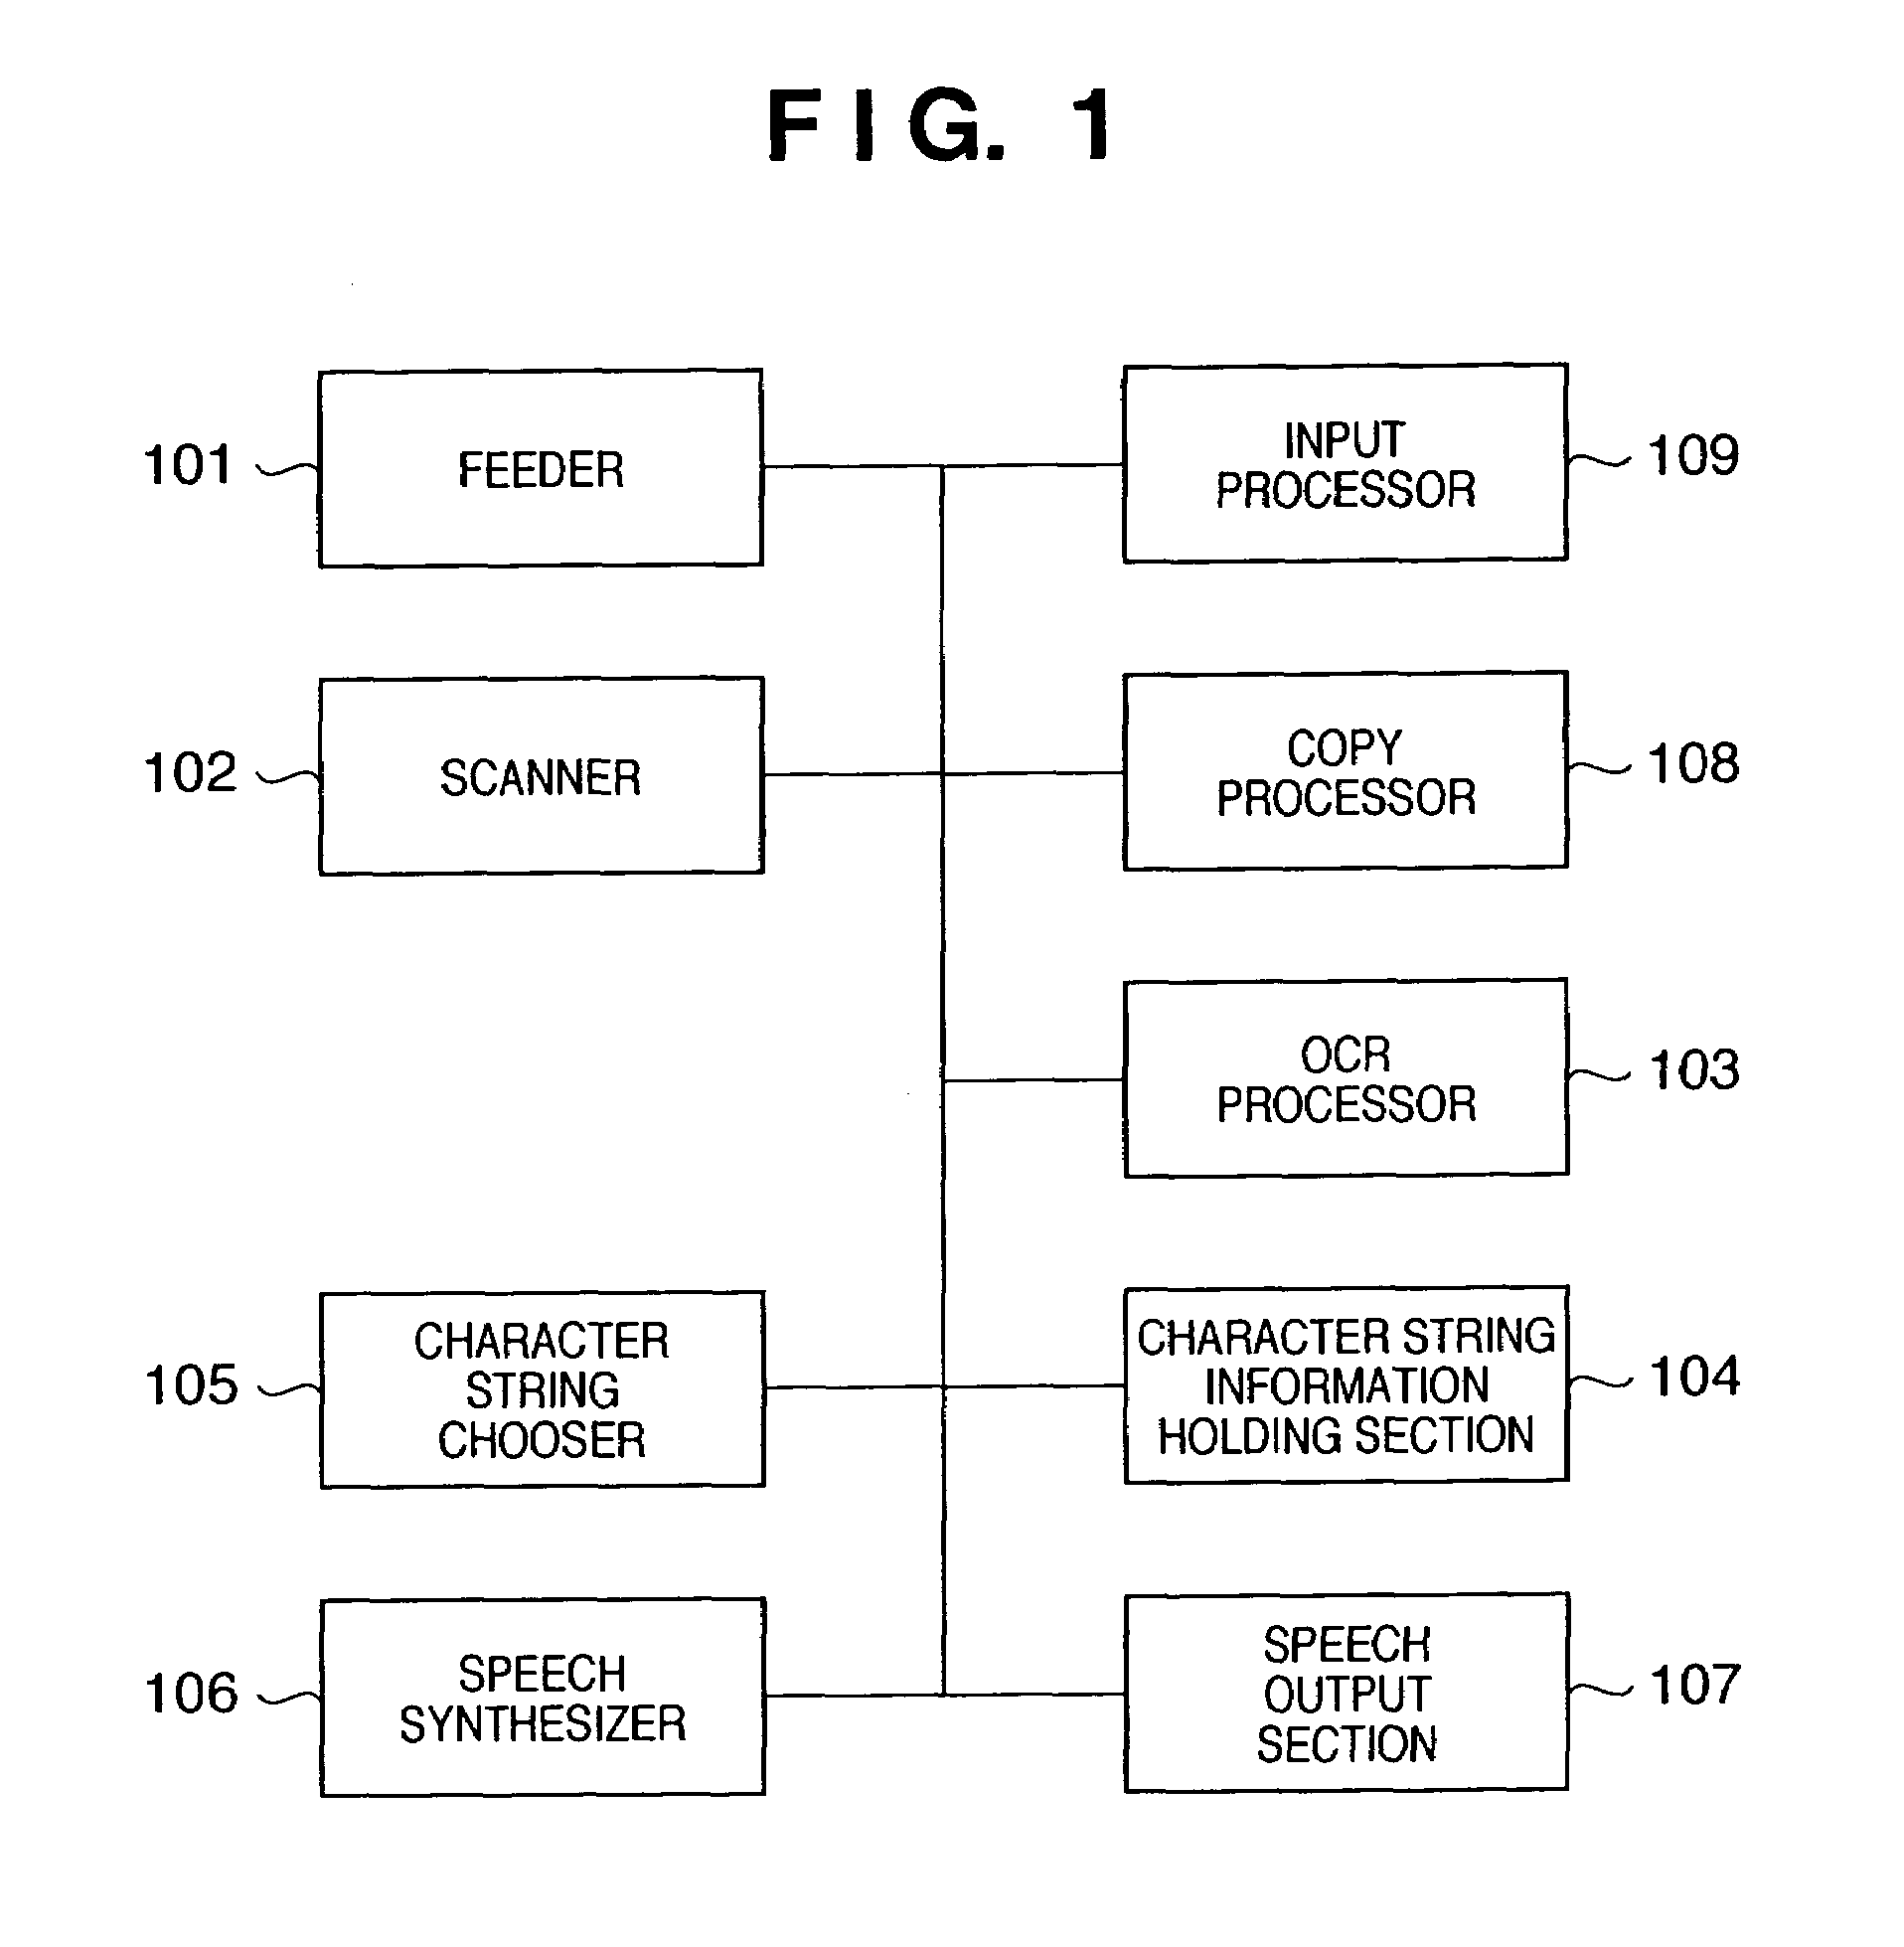 Method, apparatus and program for recognizing, extracting, and speech synthesizing strings from documents